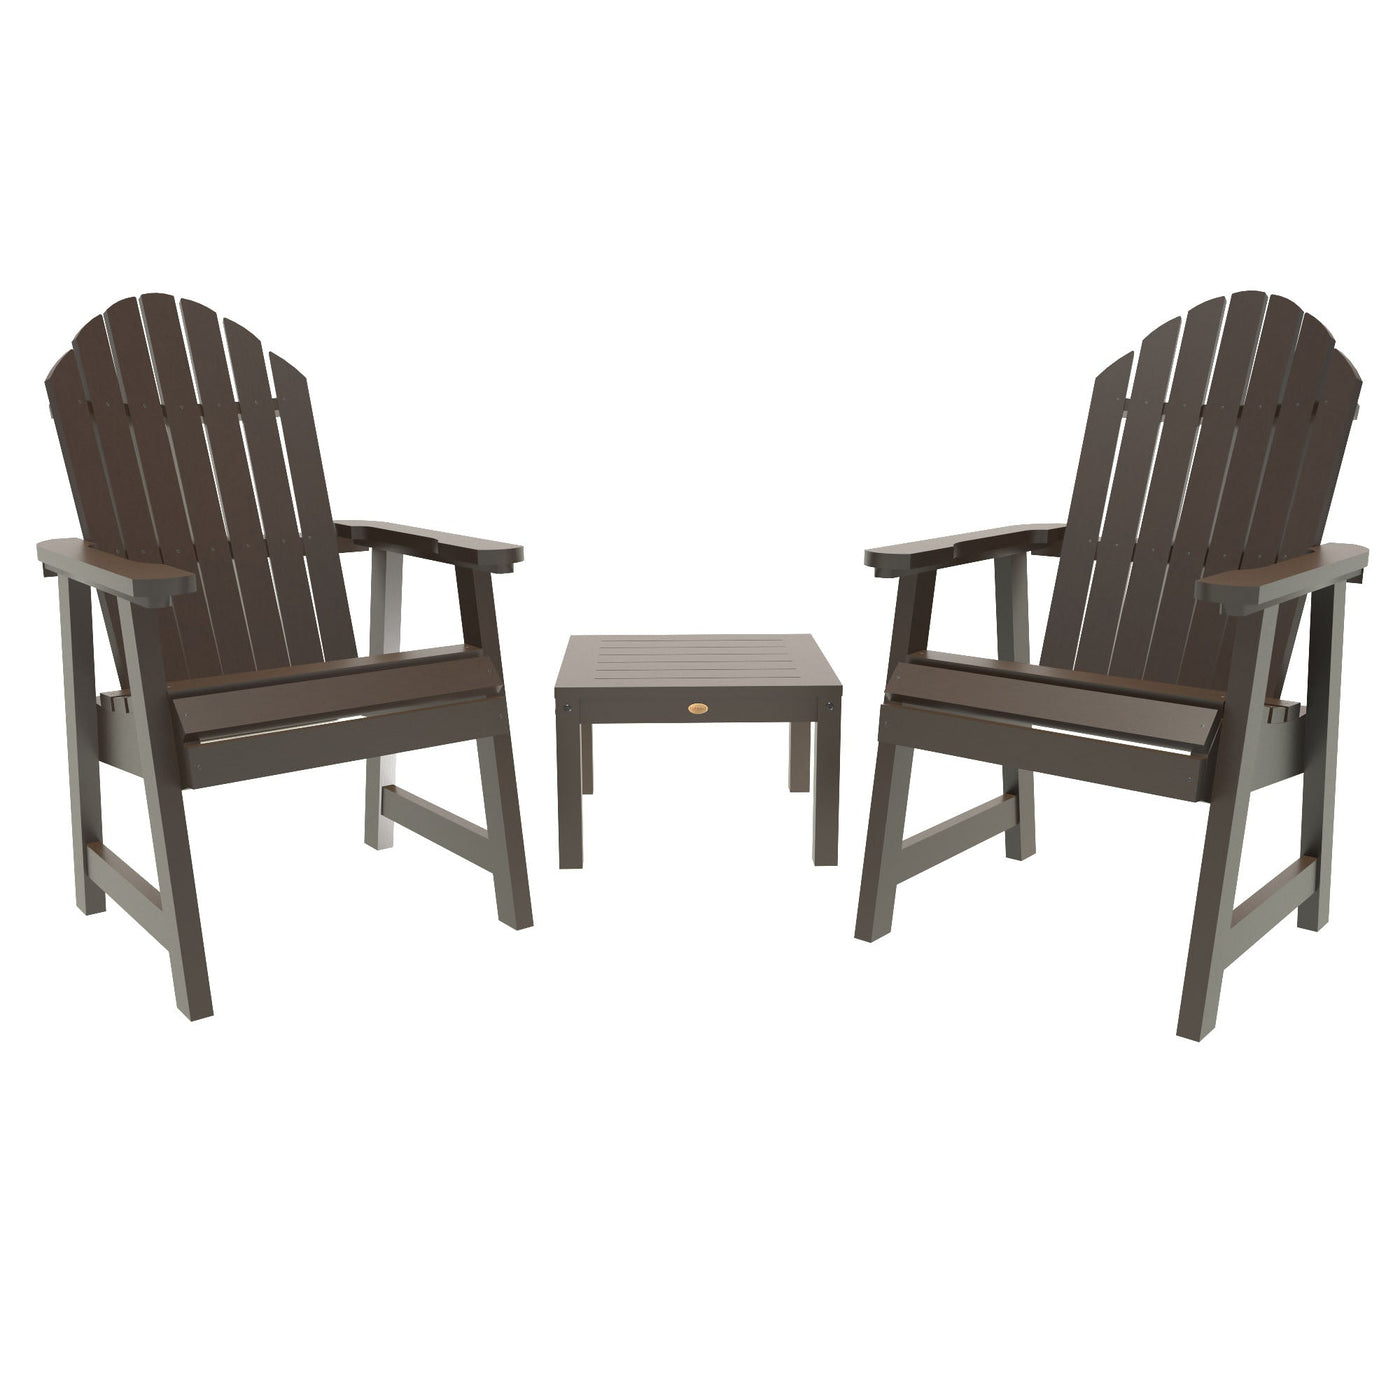 2 Hamilton Deck Chairs with Adirondack Side Table Highwood USA Weathered Acorn 